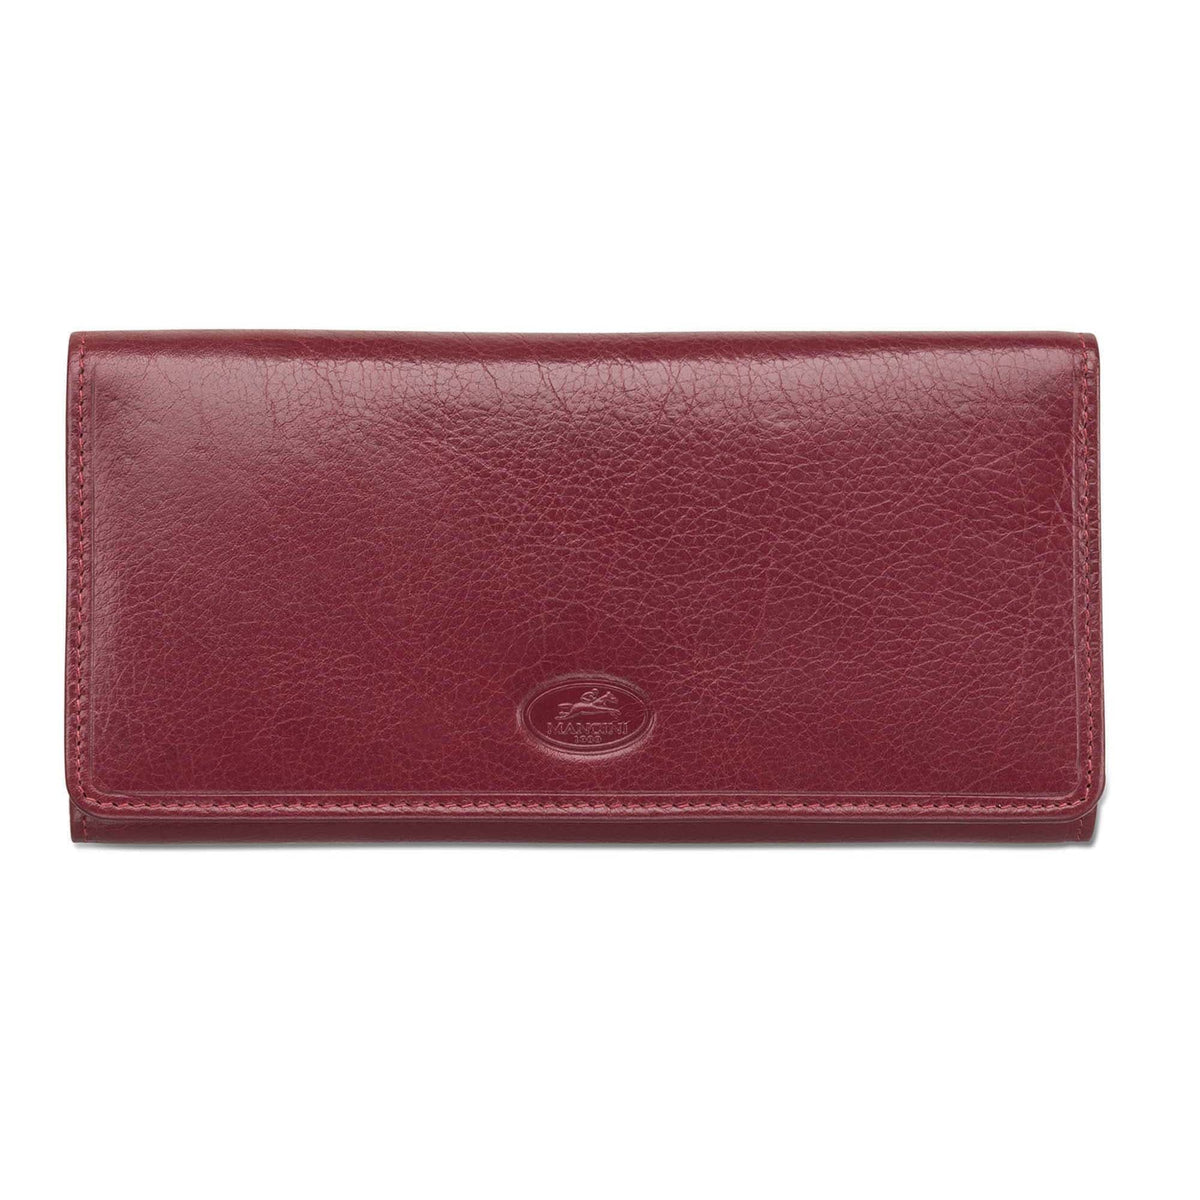 Mancini Equestrian-2 Ladies RFID Secure Trifold Wallet - Red